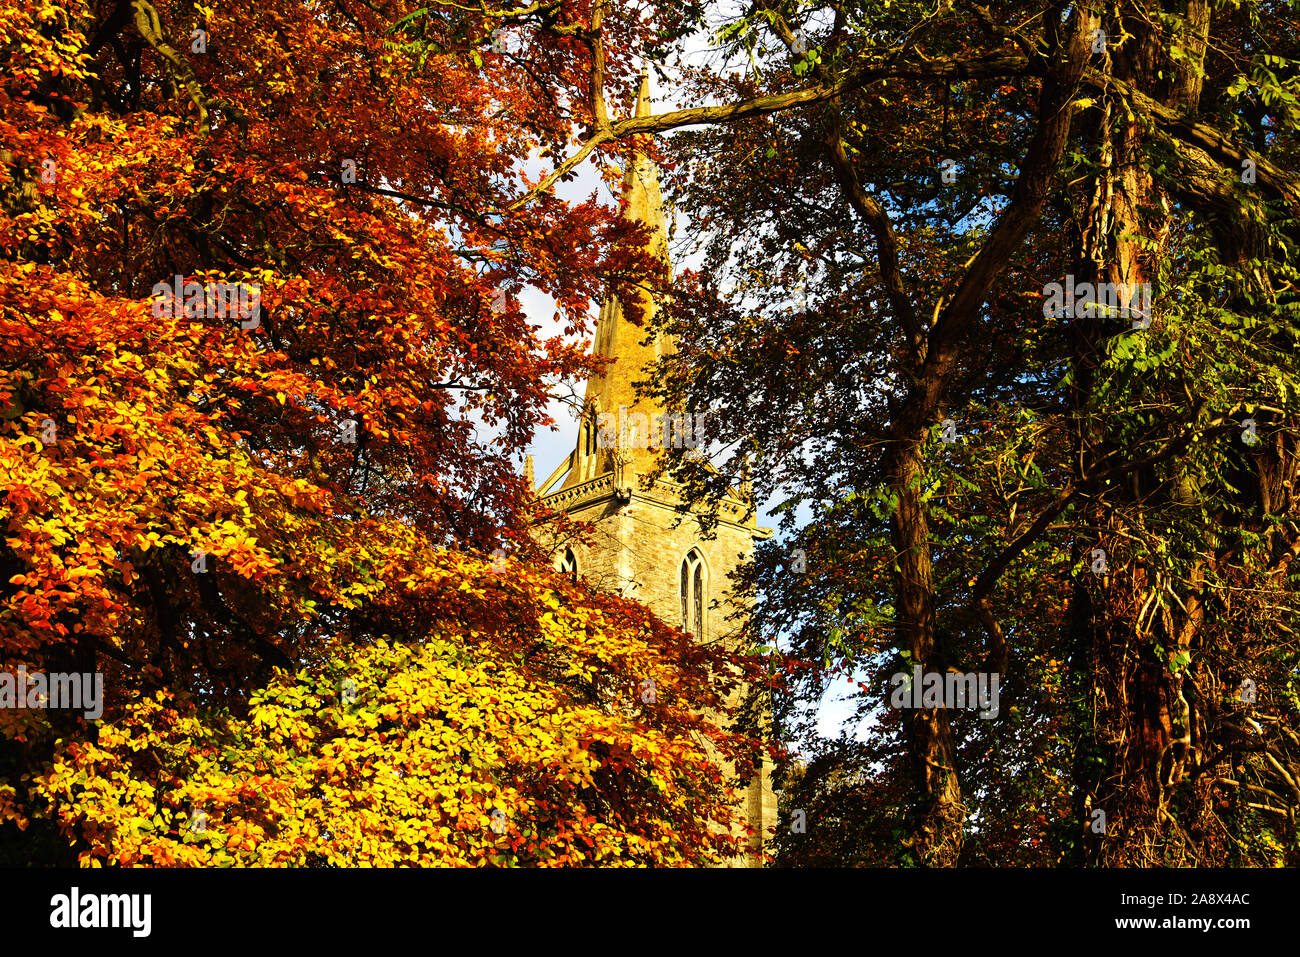 Tower and spire of St Peter's Church, Sharnbrook, Bedfordshire, UK, surrounded by trees in their autumn colours Stock Photo